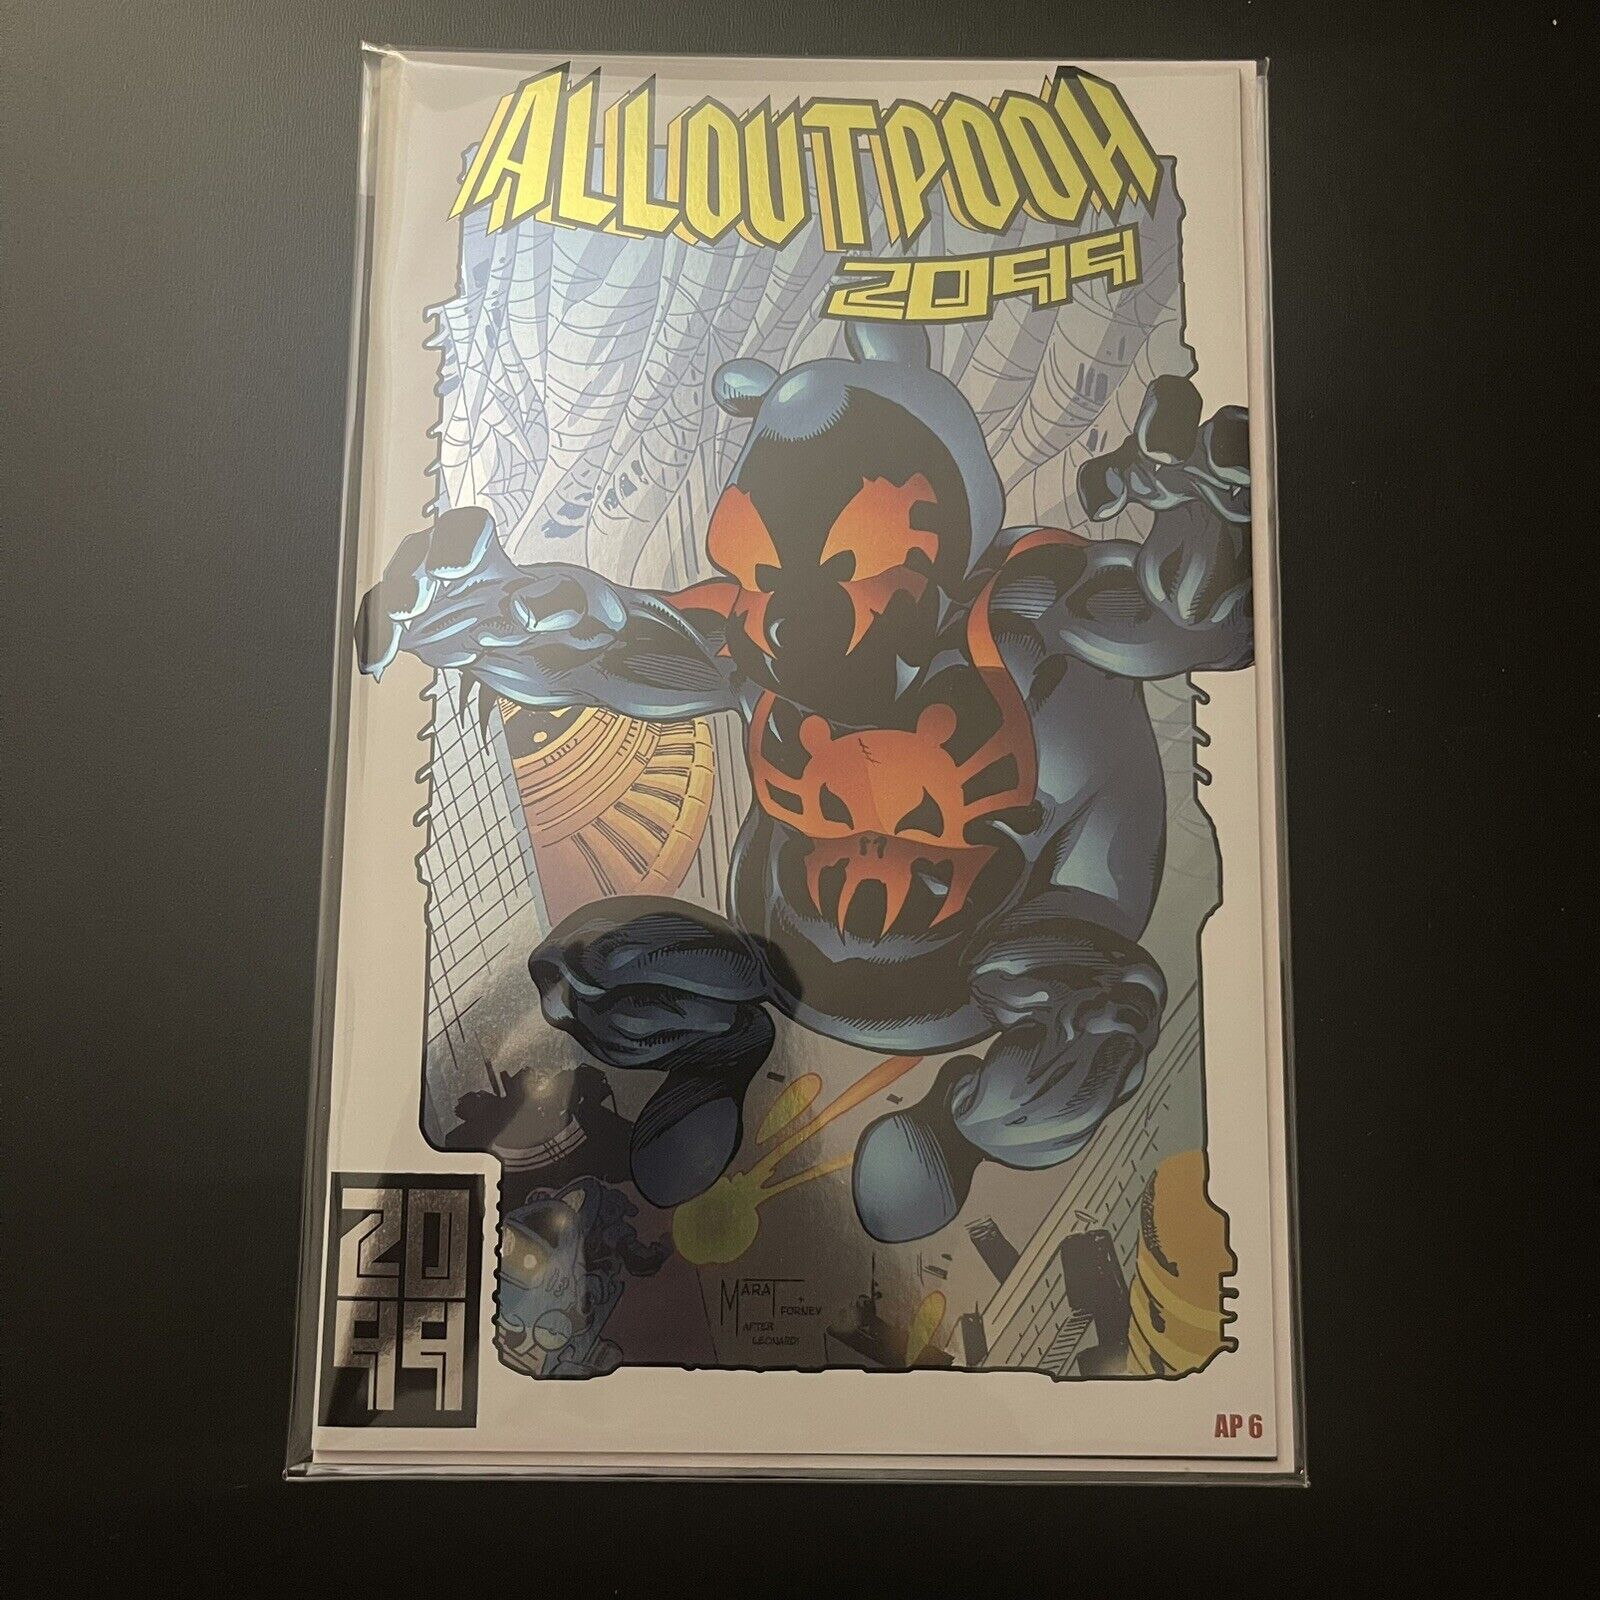  All Out Pooh 2099 White Foil Cover Variant AP 6 - Rare Comic Book - Grade 9.6+